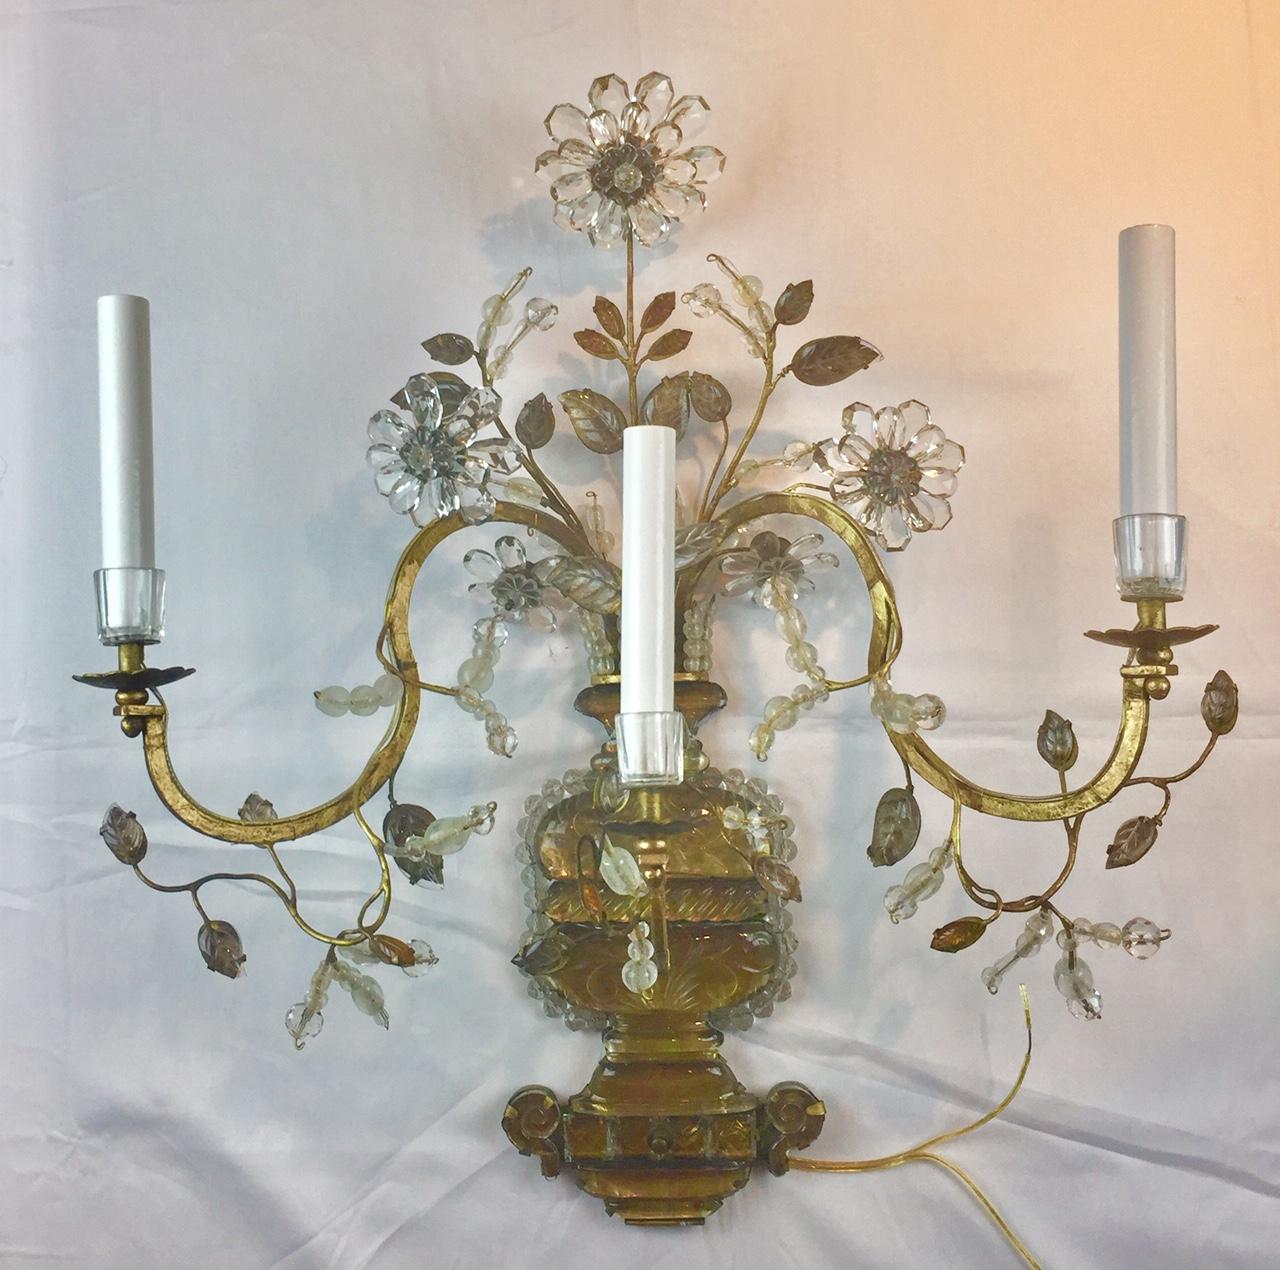 This whimsical design of crystal bouquets set in crystal and bronze urns is representative of the poetry and craftmanship of Maison Baguès. Gilt bronze and cut rock crystal 3-light wall sconces of superb quality, with a central carved rock crystal